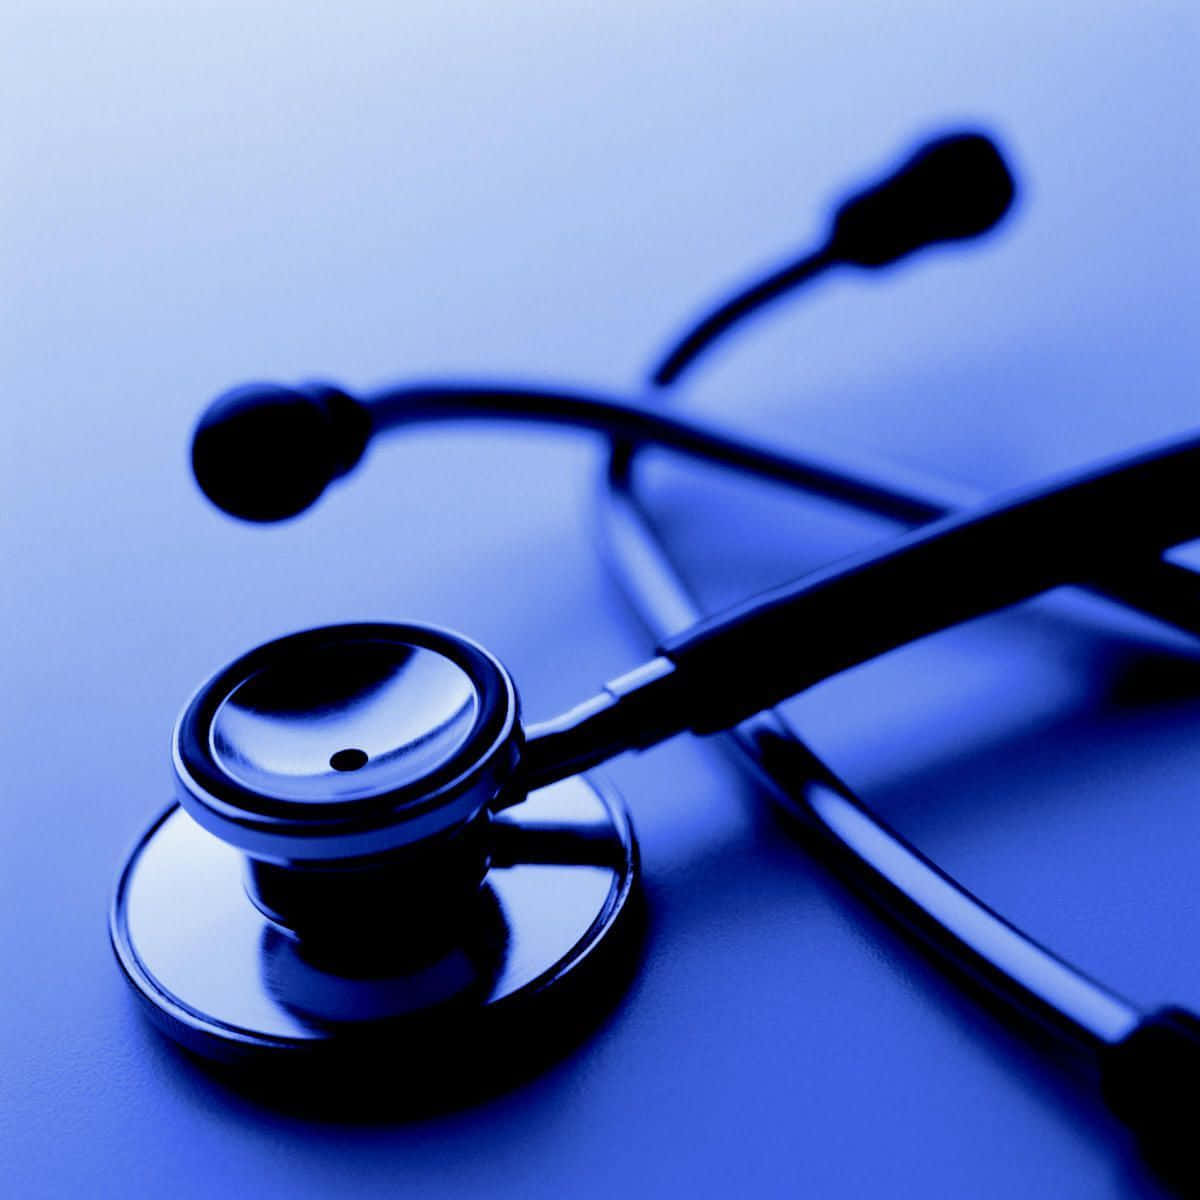 A Stethoscope On A Blue Background